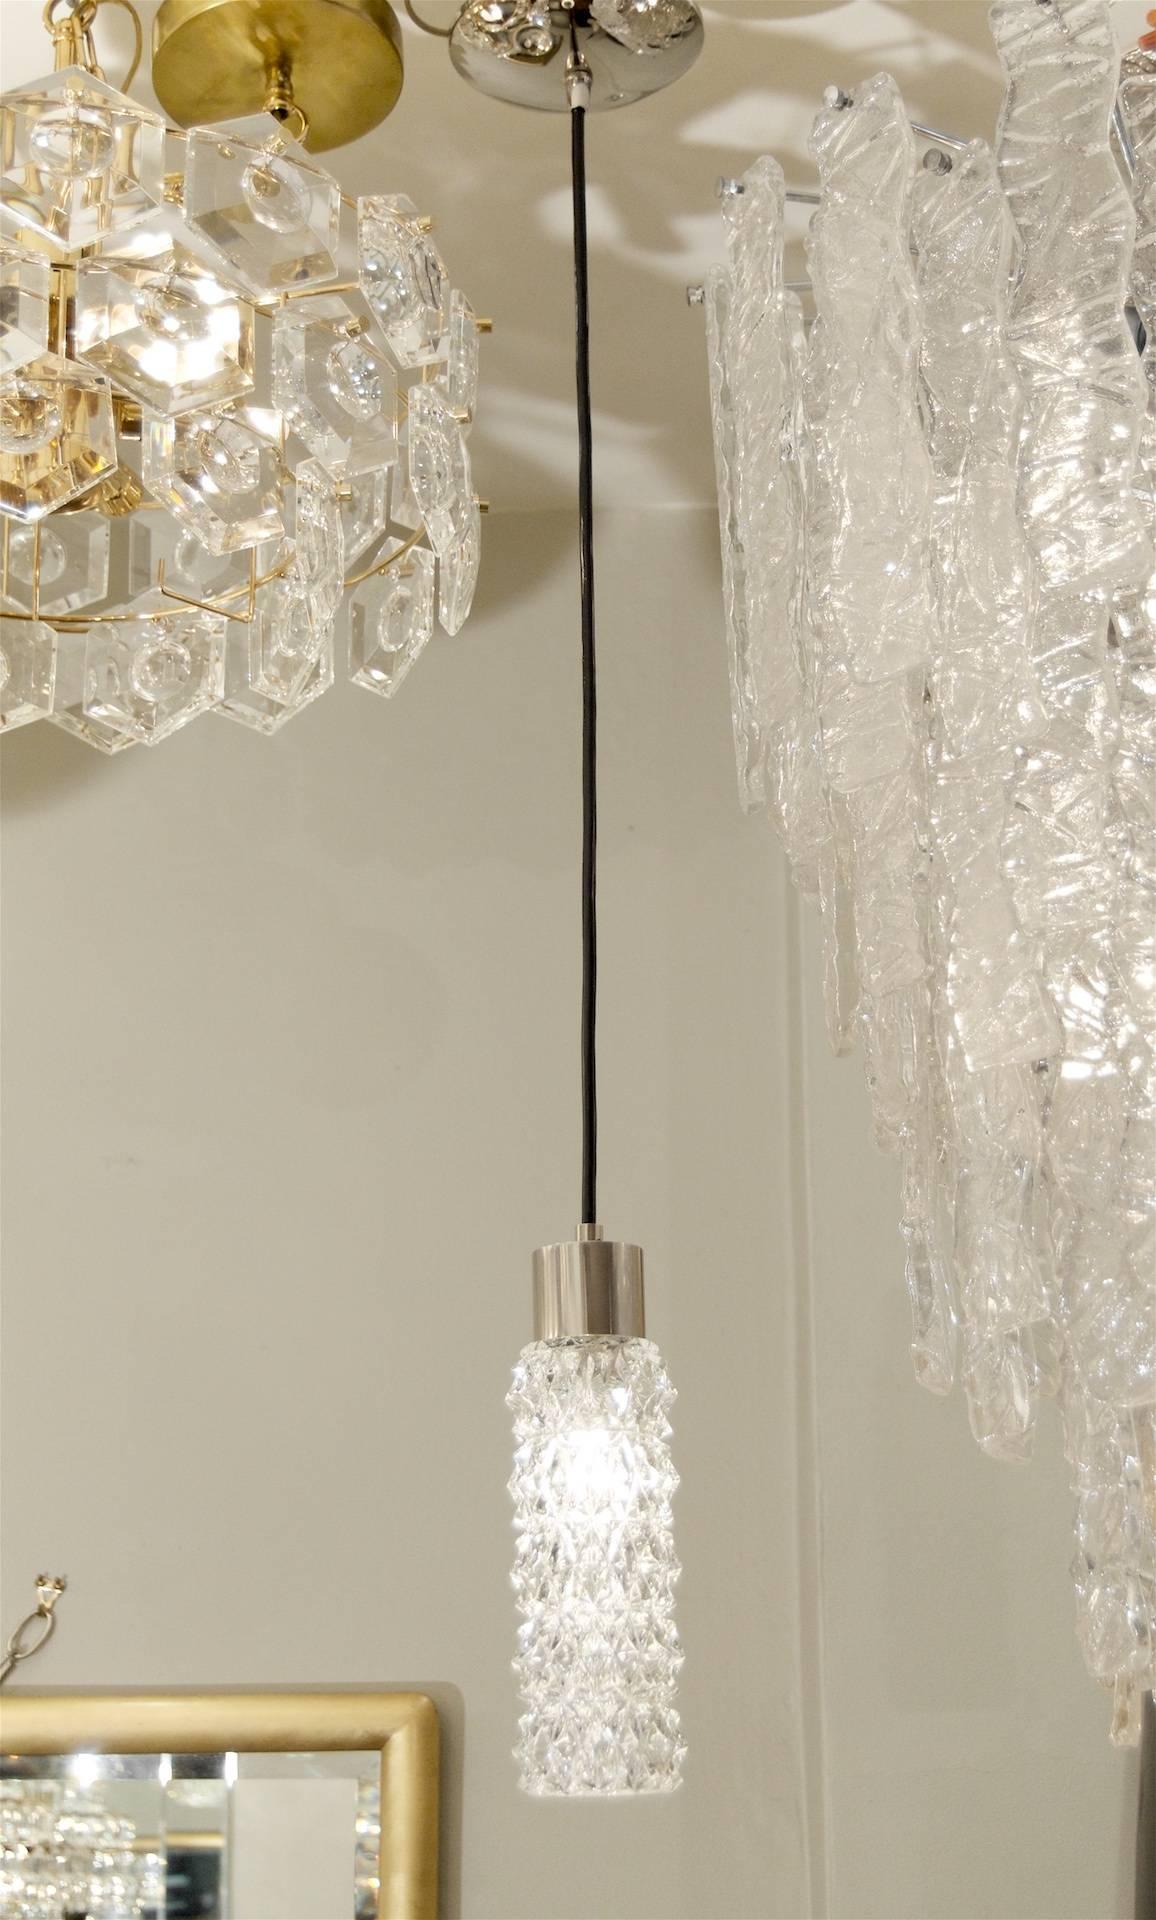 Mid-Century Modern Chrome and Crystalline Faceted Pendant Lights (3 Available) For Sale